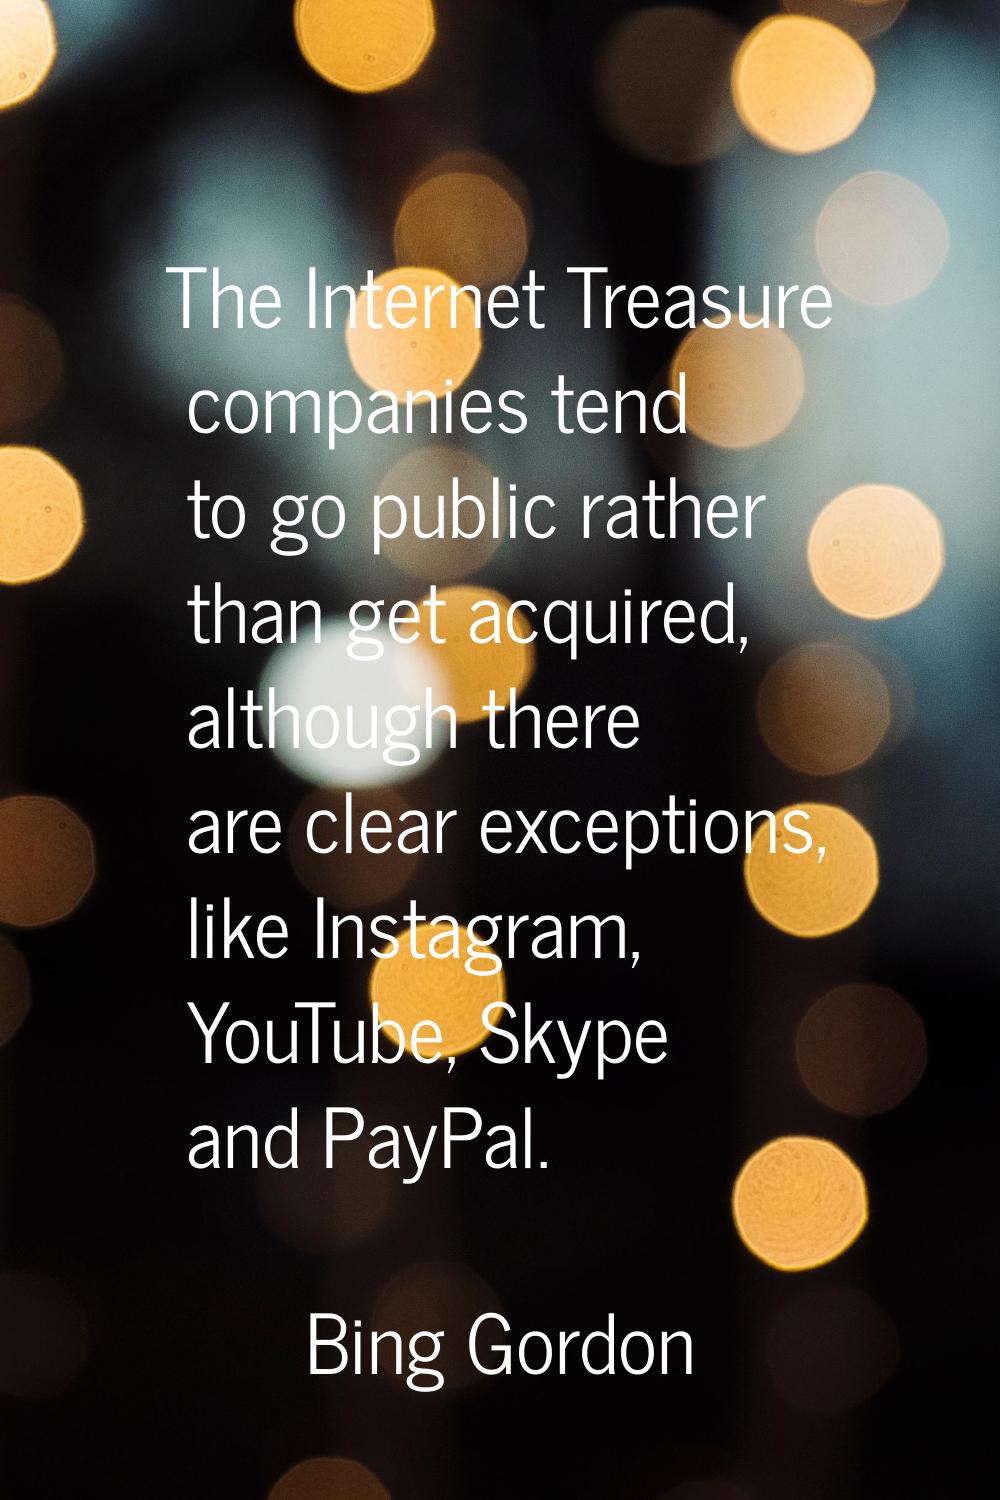 The Internet Treasure companies tend to go public rather than get acquired, although there are clea